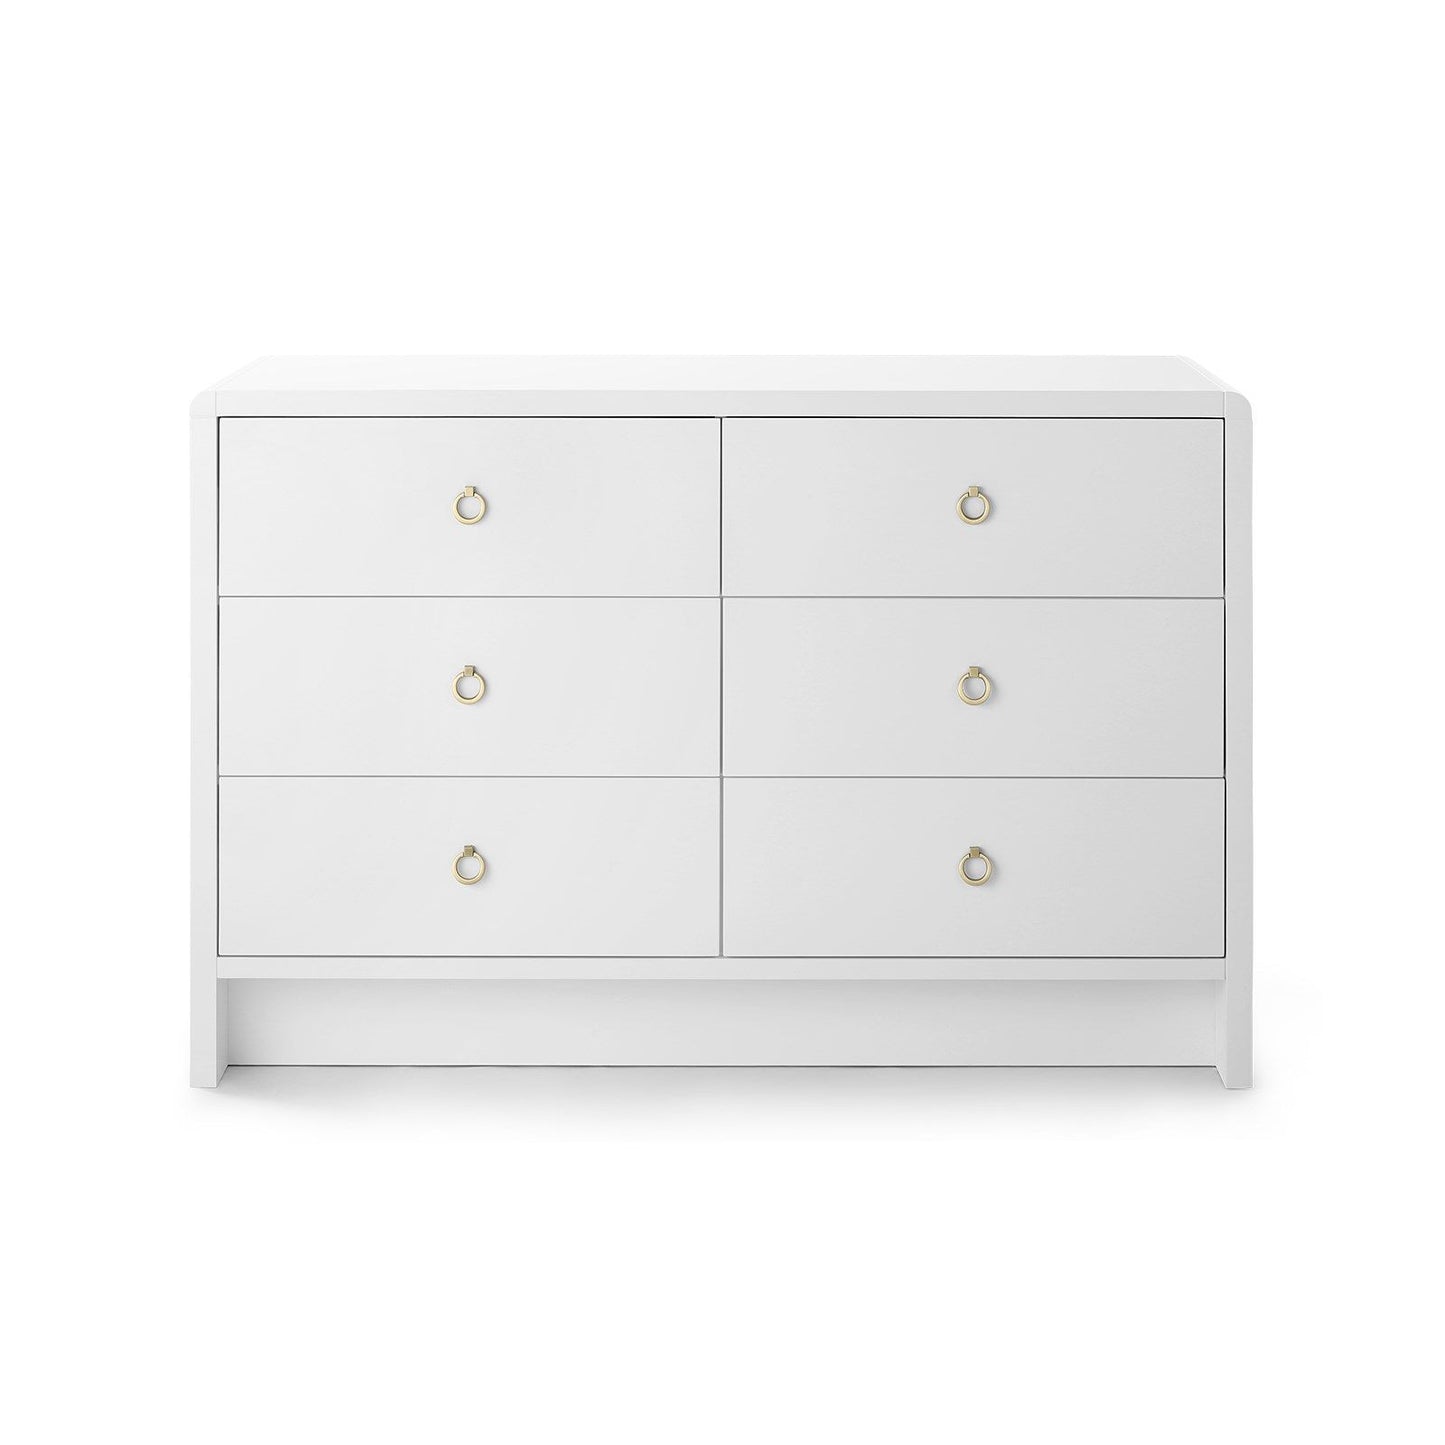 Load image into Gallery viewer, Bryant Extra Large 6-Drawer Drawer Bungalow 5     Four Hands, Burke Decor, Mid Century Modern Furniture, Old Bones Furniture Company, Old Bones Co, Modern Mid Century, Designer Furniture, https://www.oldbonesco.com/
